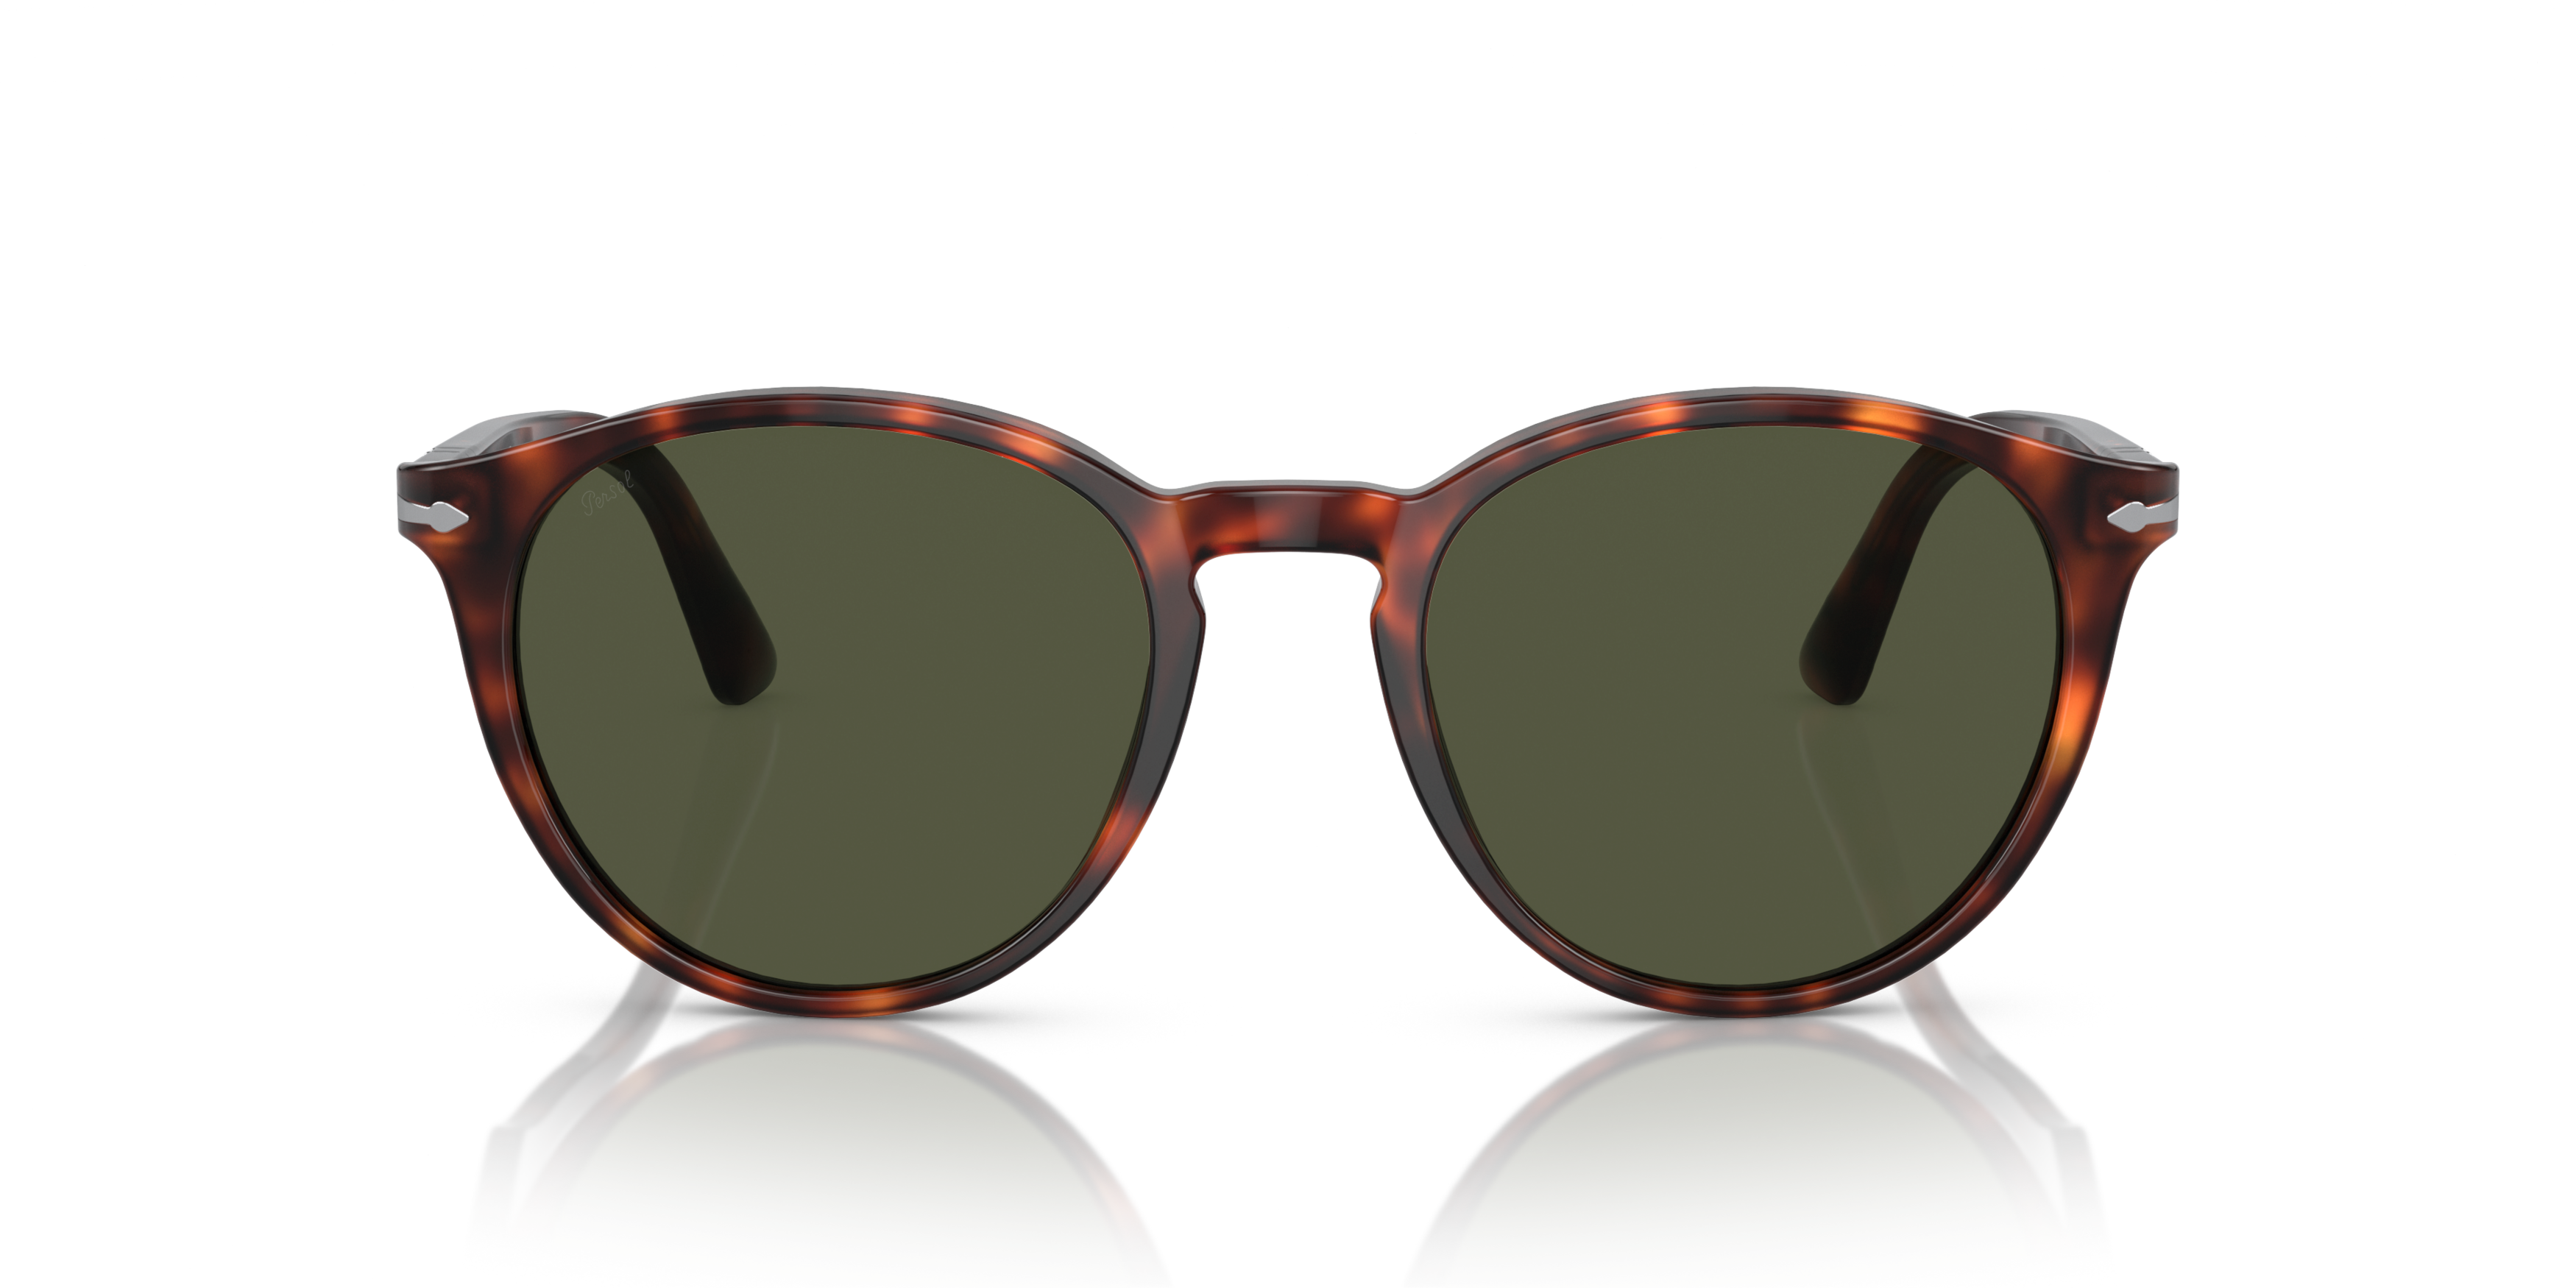 [products.image.front] Persol PO3152S 901531